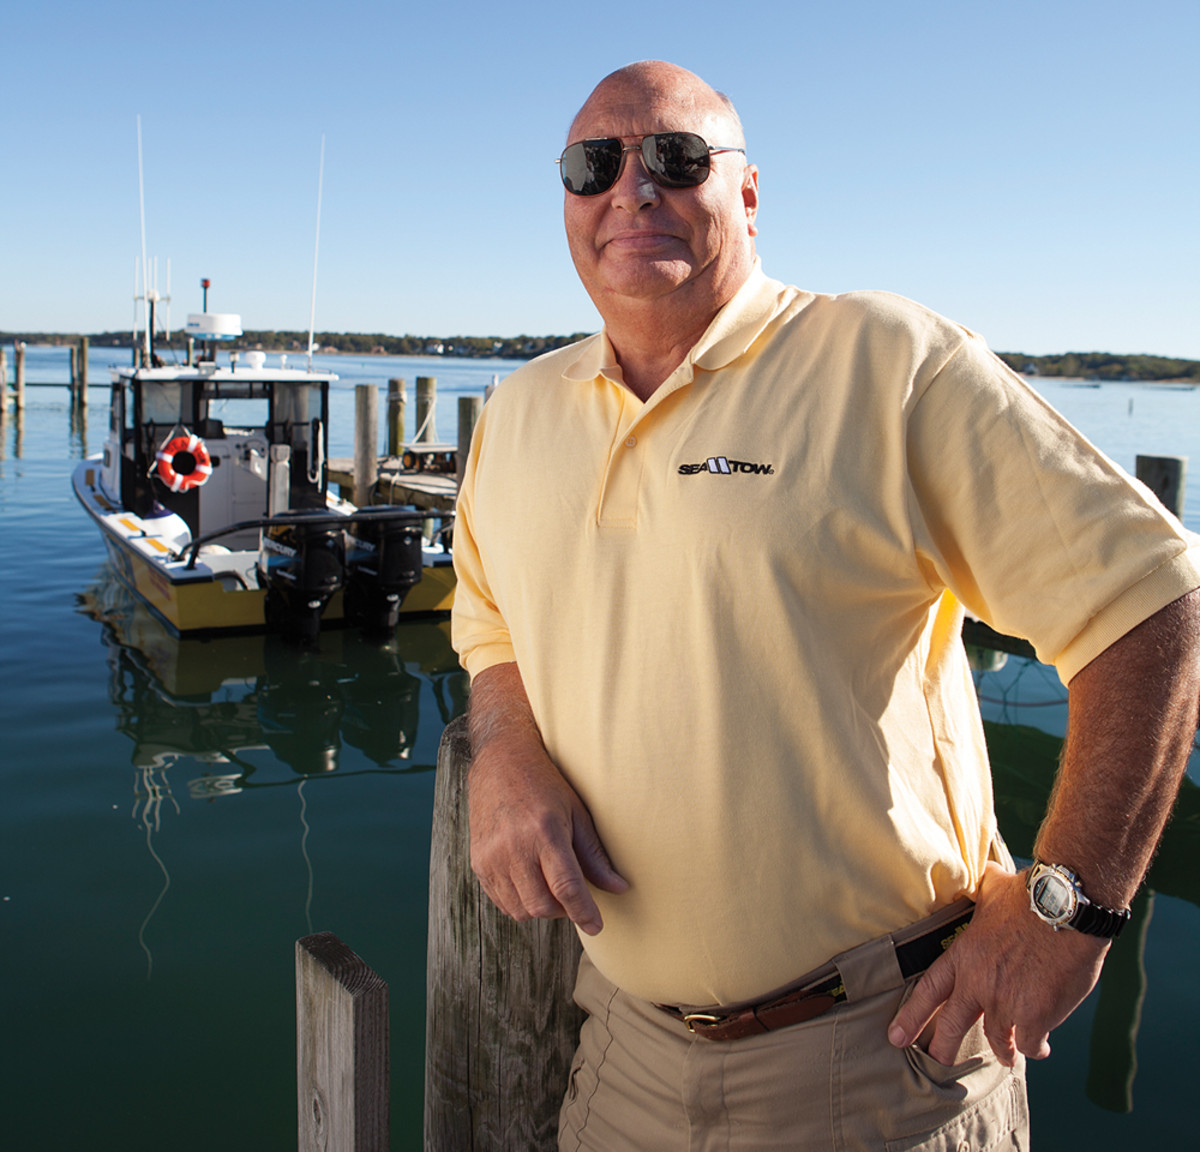 Capt. Joseph Frohnhoefer Jr. founded Sea Tow Services International in 1983. Sea Tow now has 600 U.S. and international franchises. Its distinctive yellow boats are ubiquitous on heavily used waterways.